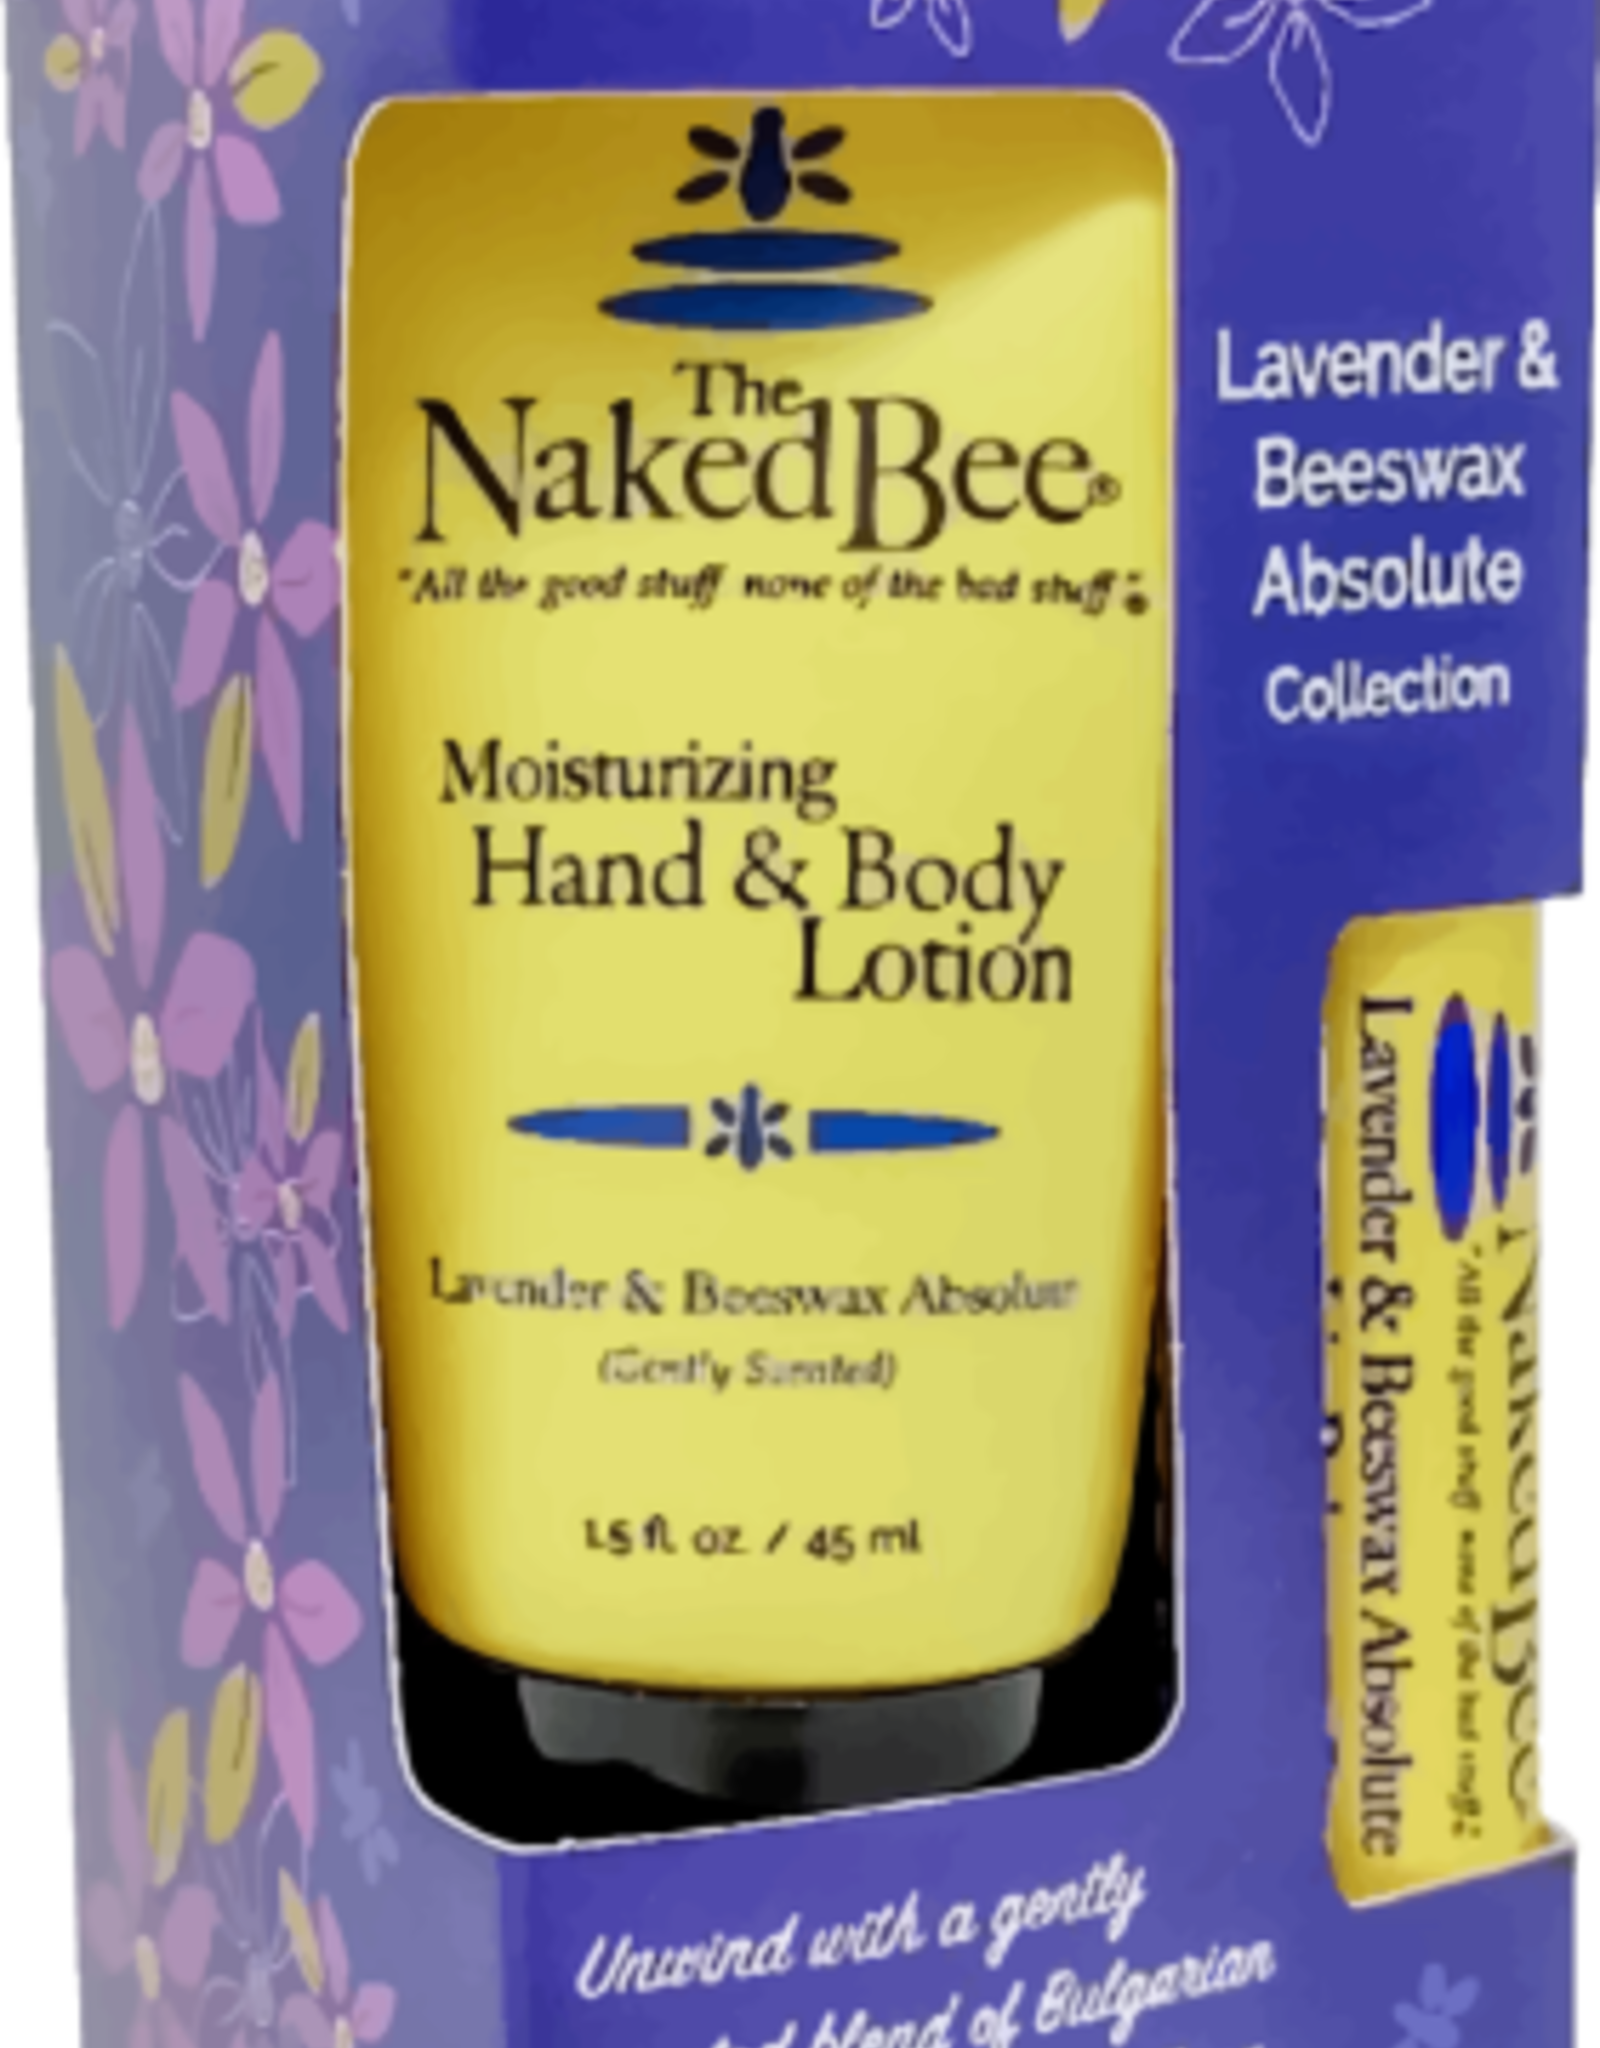 Naked Bee Lavender & Beeswax Absolute Gift Collection - New!